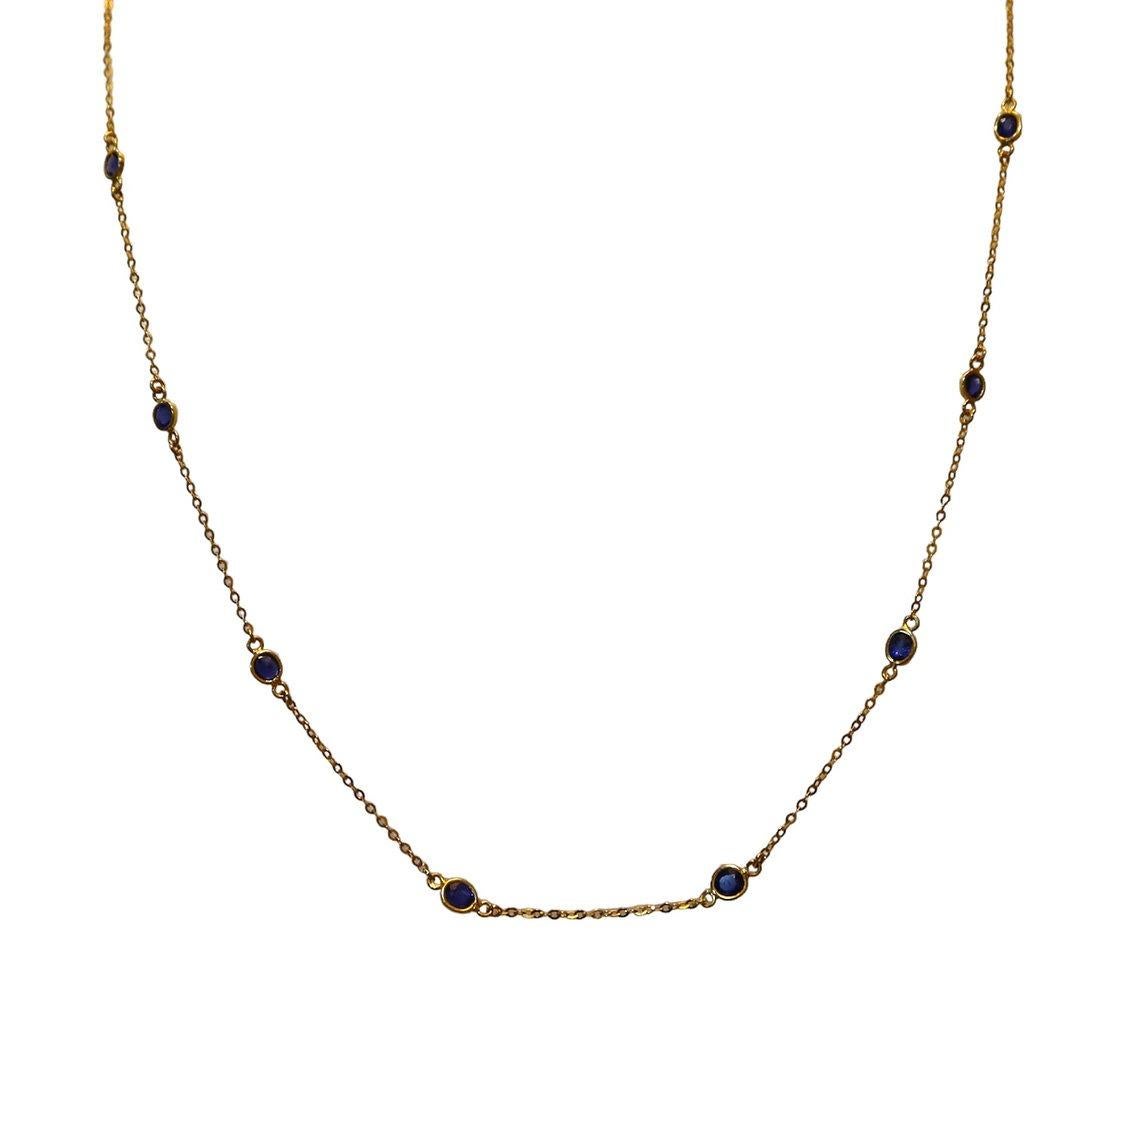 This simple minimalist design includes 8 Unheated Burma blue sapphires that float around the neck on a dainty chain. Most importantly, every single stone is an earth-mined natural sapphire from Mogok, Burma, free from heat treatment or any